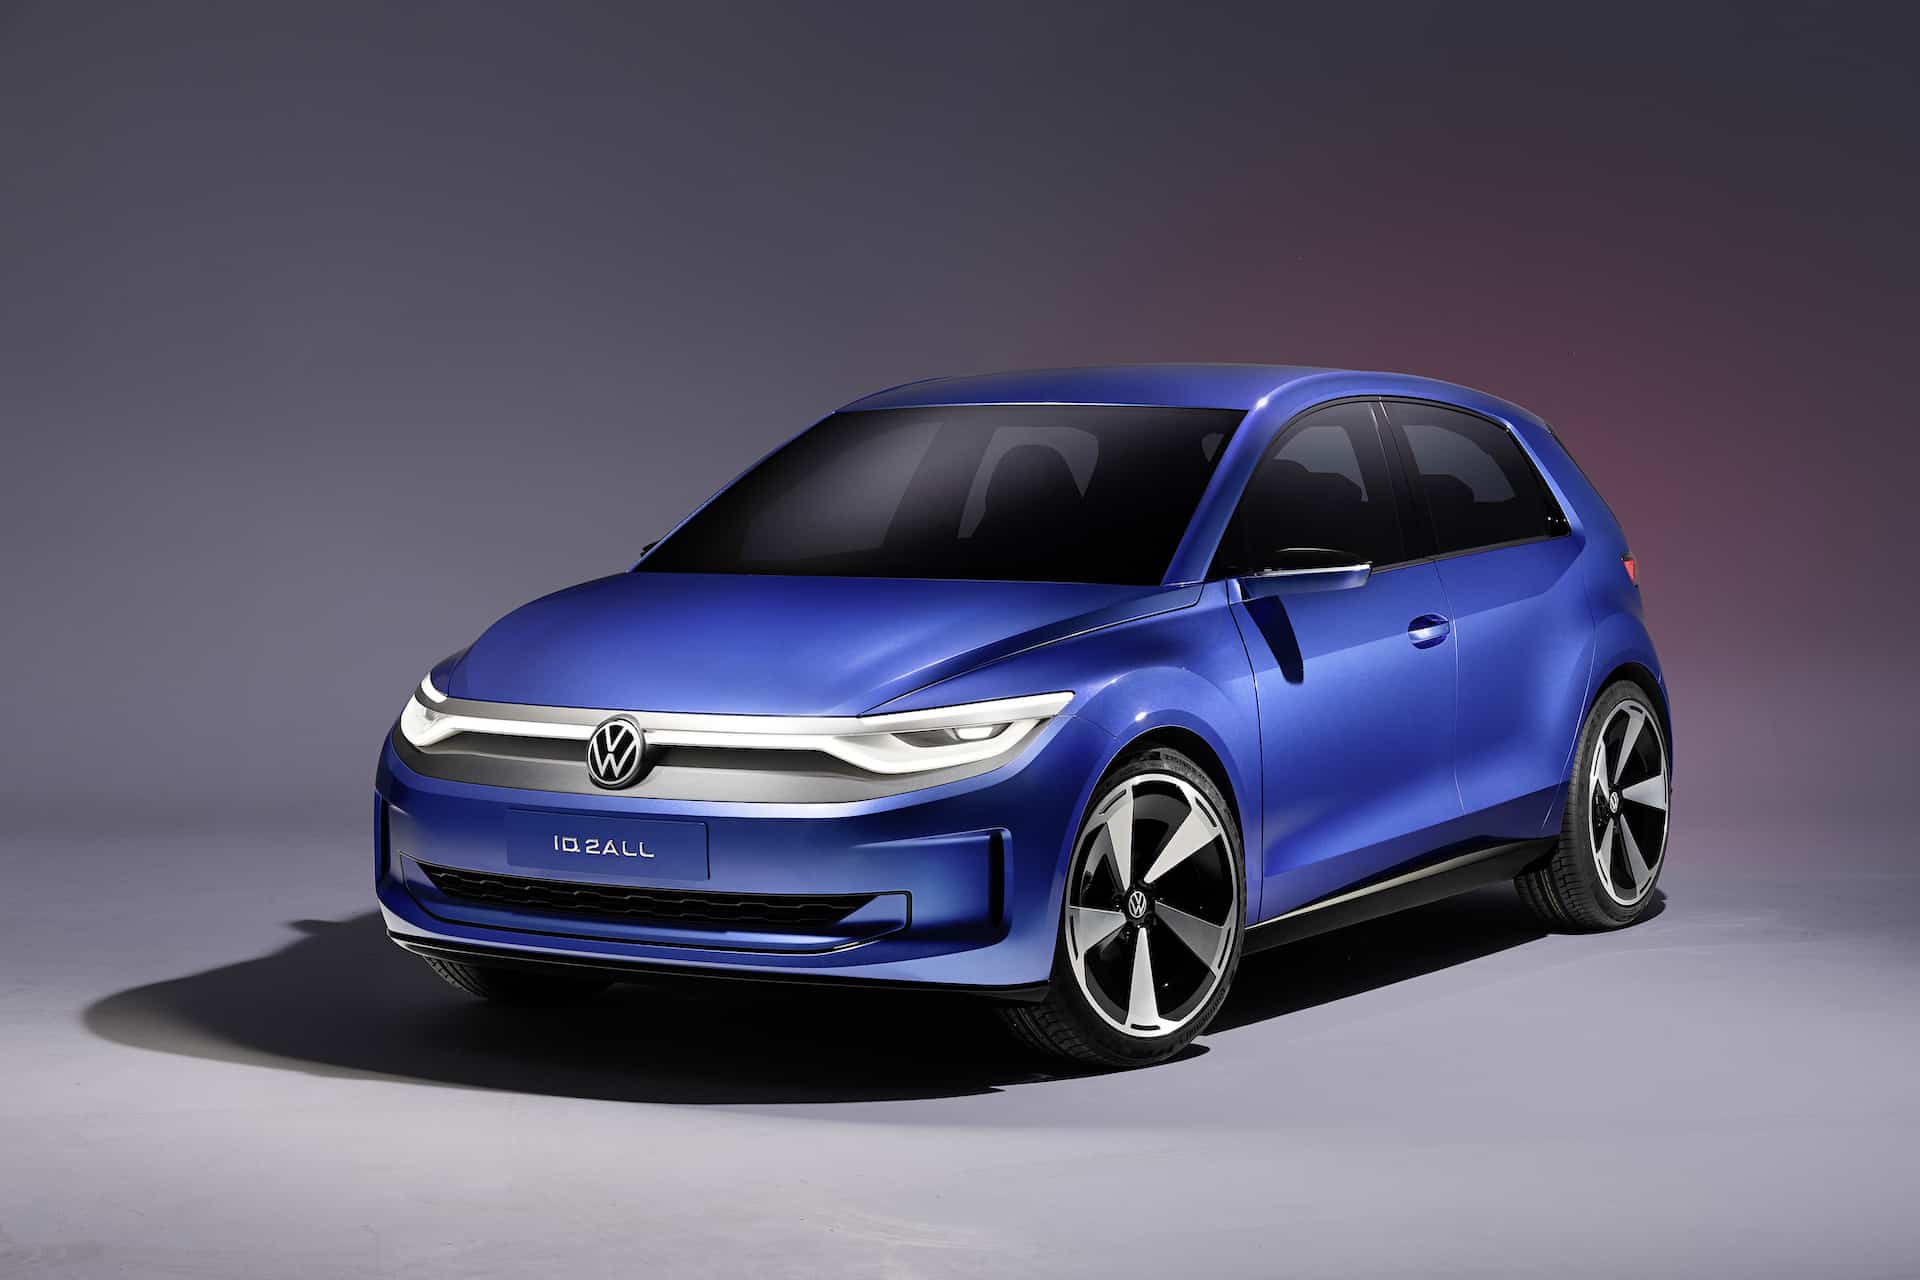 Volkswagen Unveils ID. 2all Concept Car, Targets Affordable Electric Mobility